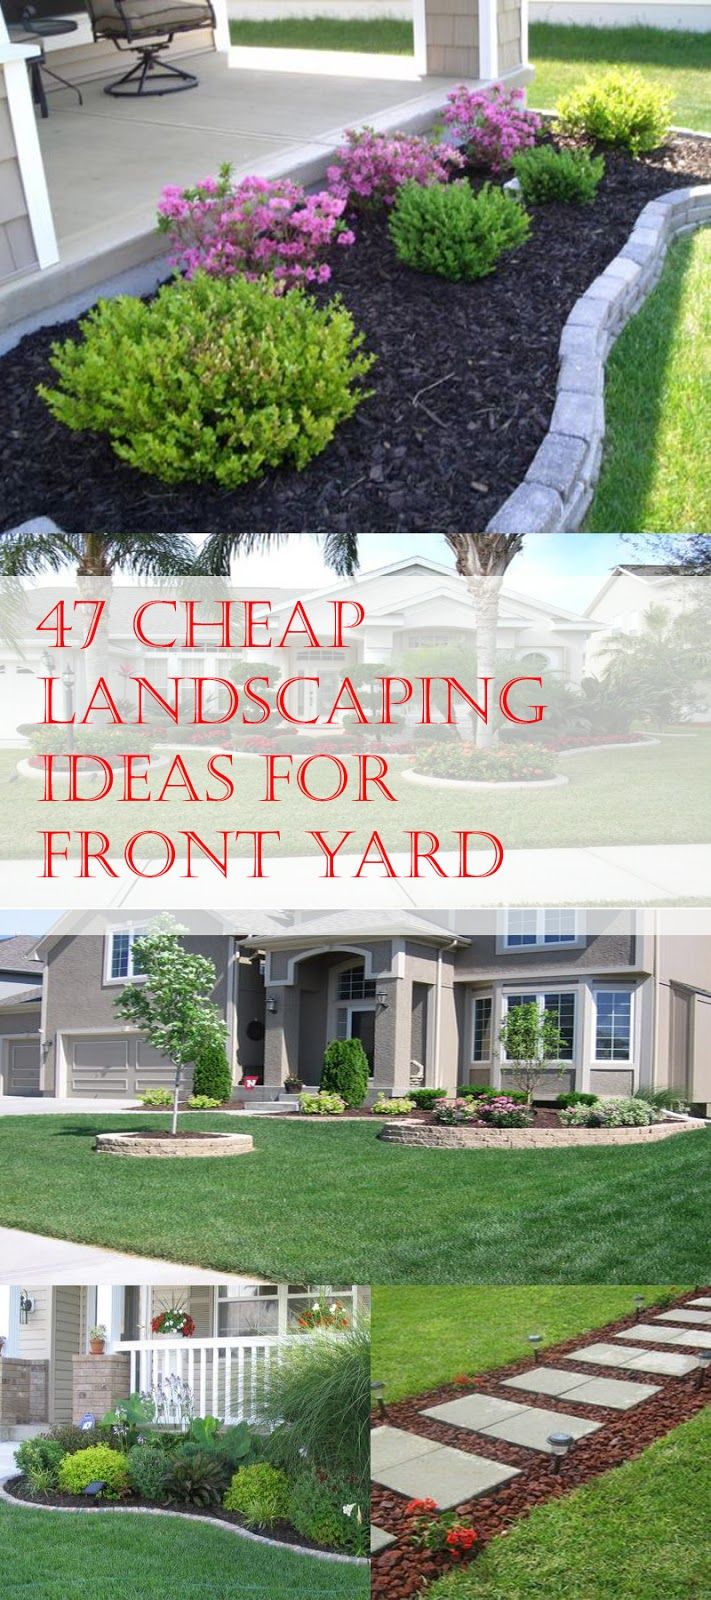 20 Low Cost Front Yard Landscaping, How Much Does It Cost To Landscape A Small Front Yard